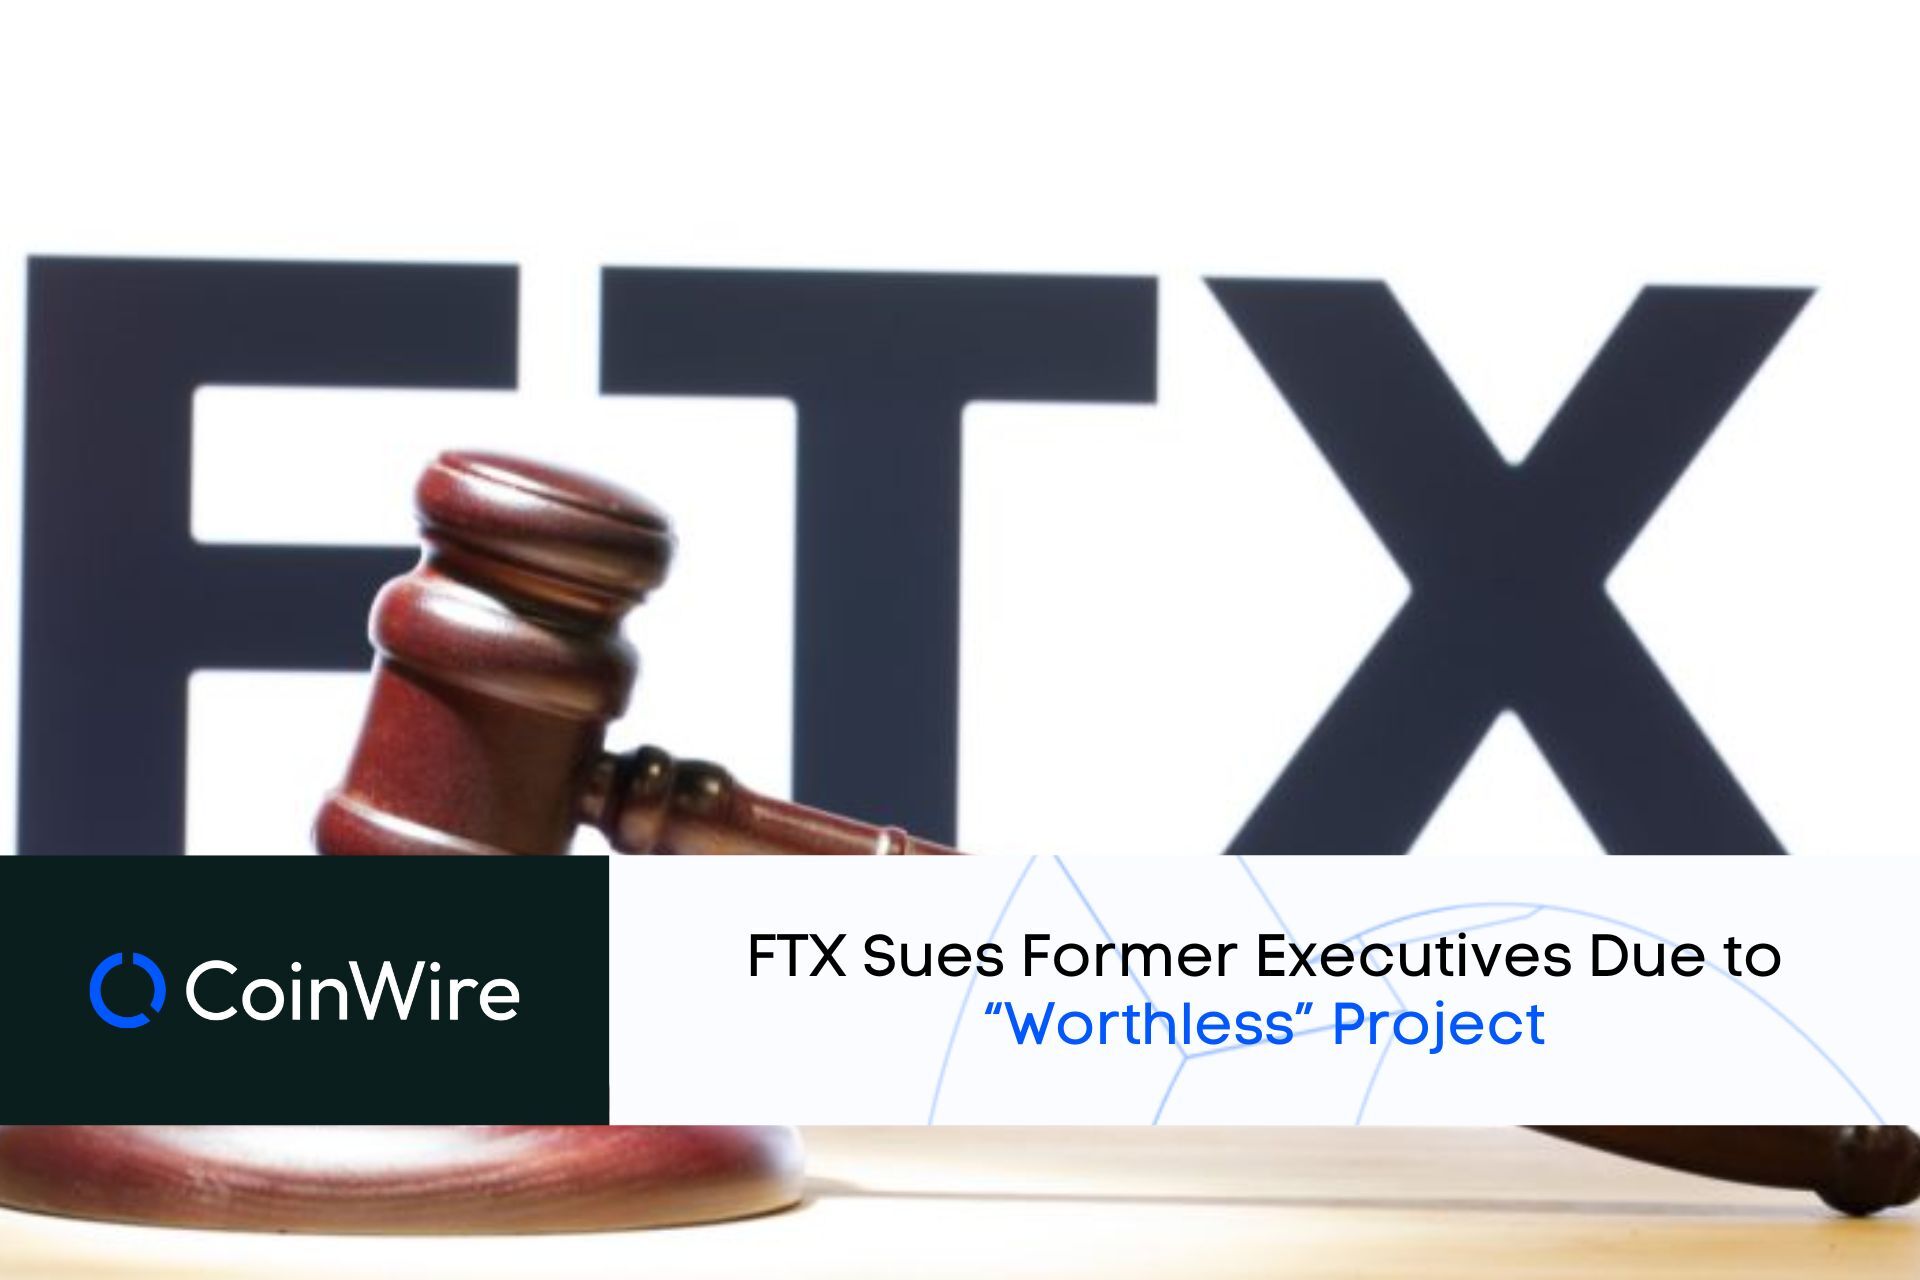 Ftx Sues Sam Bankman-Fried Due To “Worthless” Project